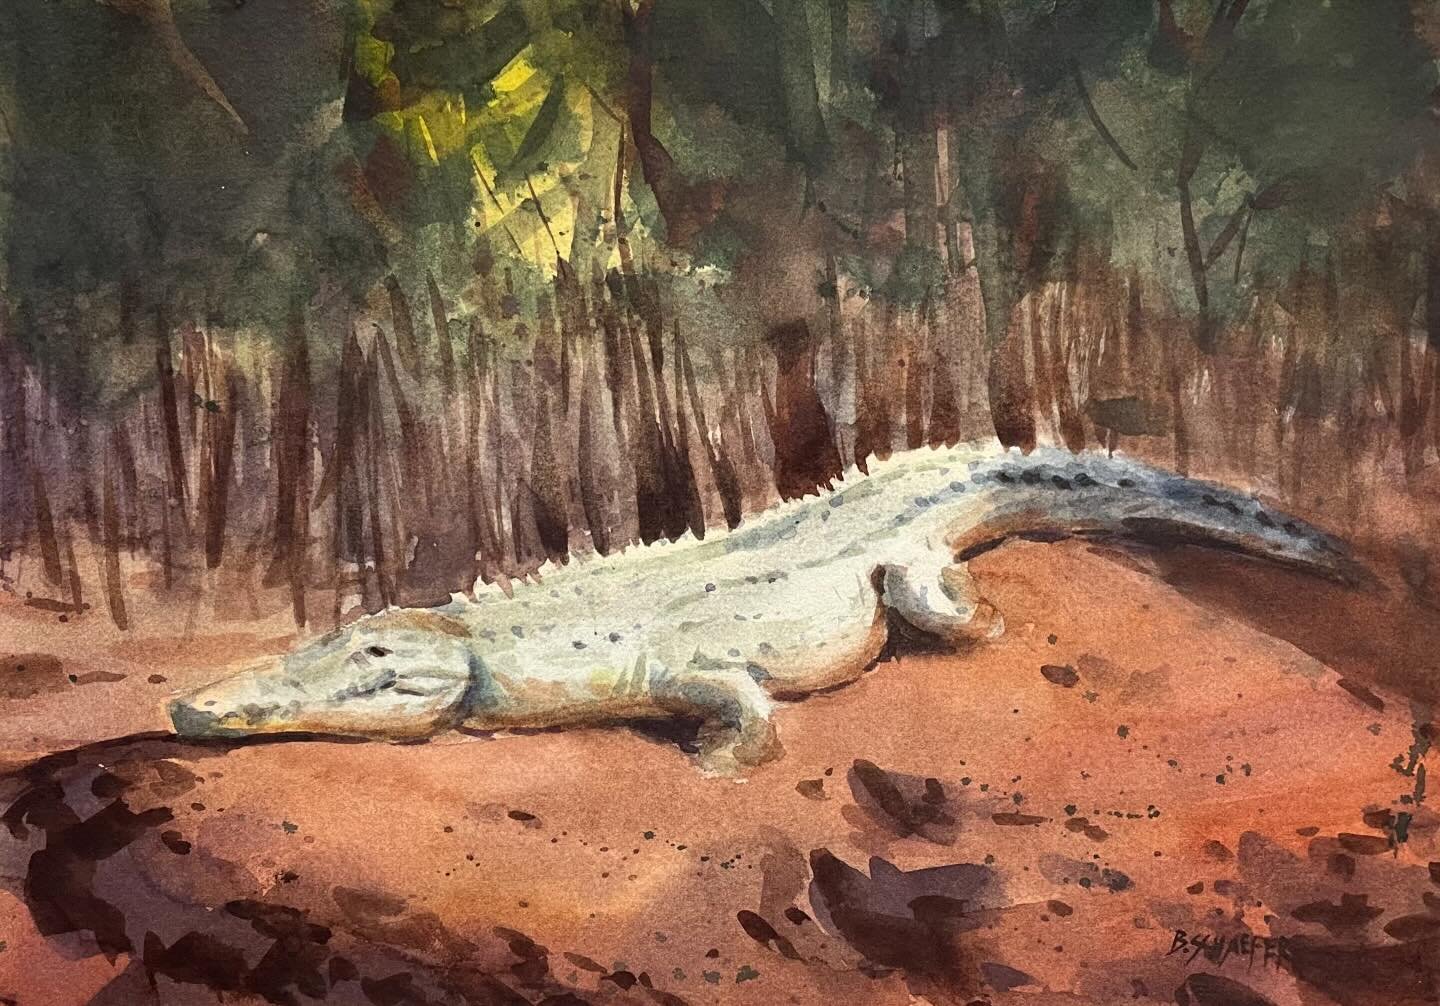 I painted this alligator a few years ago during a livestream on my YouTube channel. Had a lot of fun with this one. Not my usual subject but a good challenge. 

Usually when I choose subjects, I just go with my gut and what I&rsquo;m interested in. M